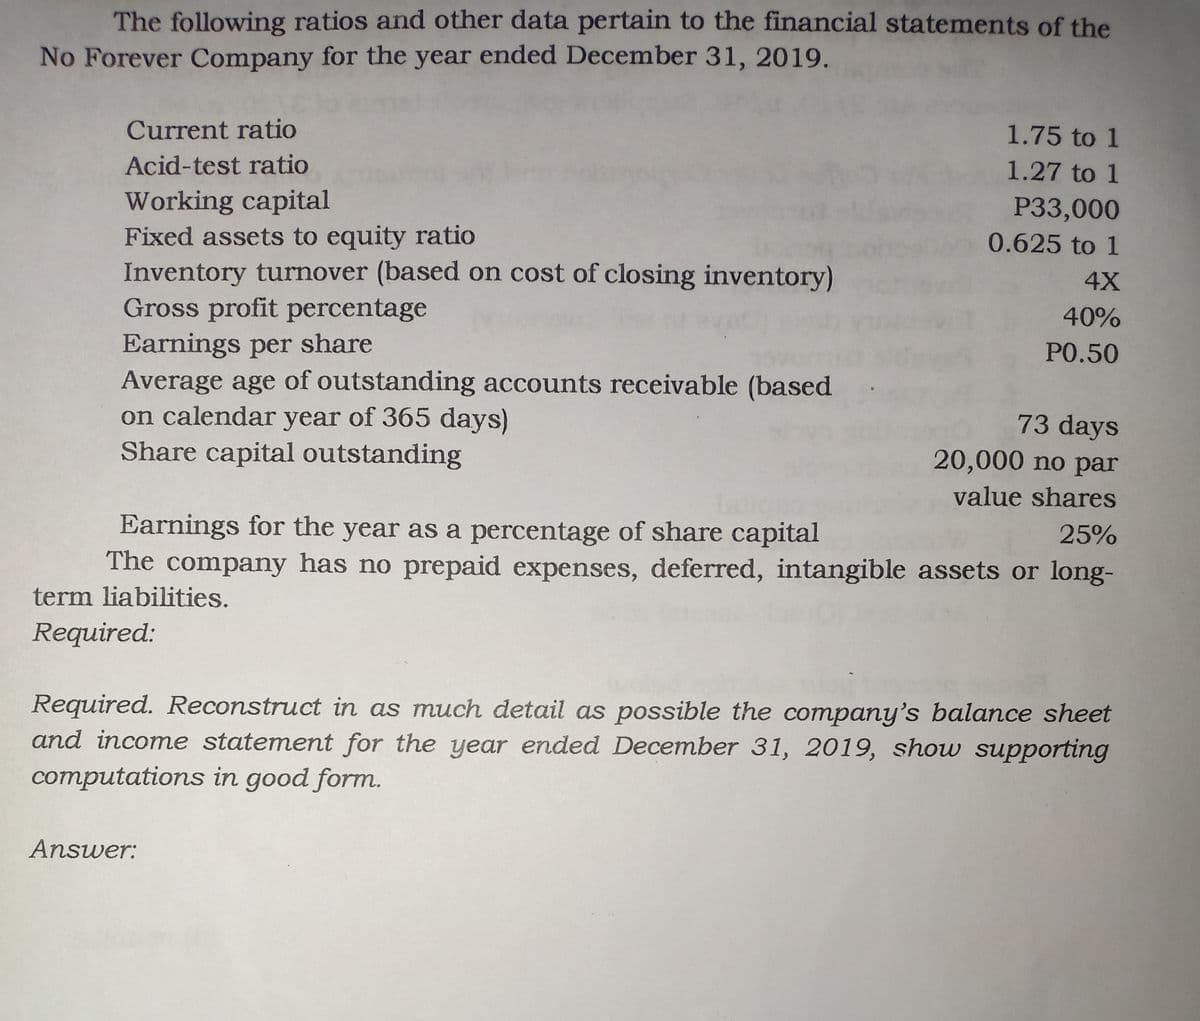 The following ratios and other data pertain to the financial statements of the
No Forever Company for the year ended December 31, 2019.
Current ratio
1.75 to 1
Acid-test ratio
1.27 to 1
Working capital
Fixed assets to equity ratio
Inventory turnover (based on cost of closing inventory)
Gross profit percentage
Earnings per share
Average age of outstanding accounts receivable (based
on calendar year of 365 days)
Share capital outstanding
P33,000
0.625 to 1
4X
40%
PO.50
73 days
20,000 no par
lat
value shares
Earnings for the year as a percentage of share capital
The company has no prepaid expenses, deferred, intangible assets or long-
25%
term liabilities.
Required:
Required. Reconstruct in as much detail as possible the company's balance sheet
and income statement for the year ended December 31, 2019, show supporting
computations in good form.
Answer:
